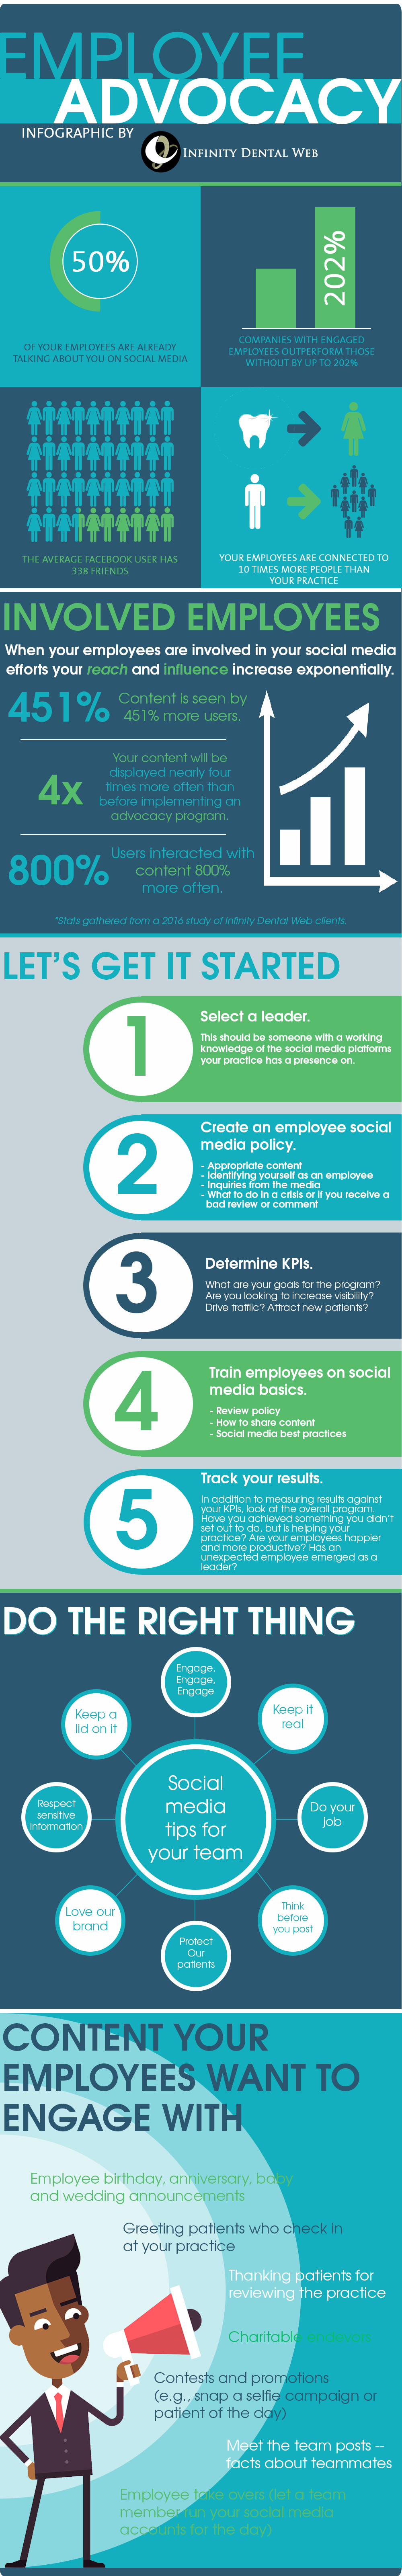 Creating an employee advocacy program could be the biggest marketing win you have this year.